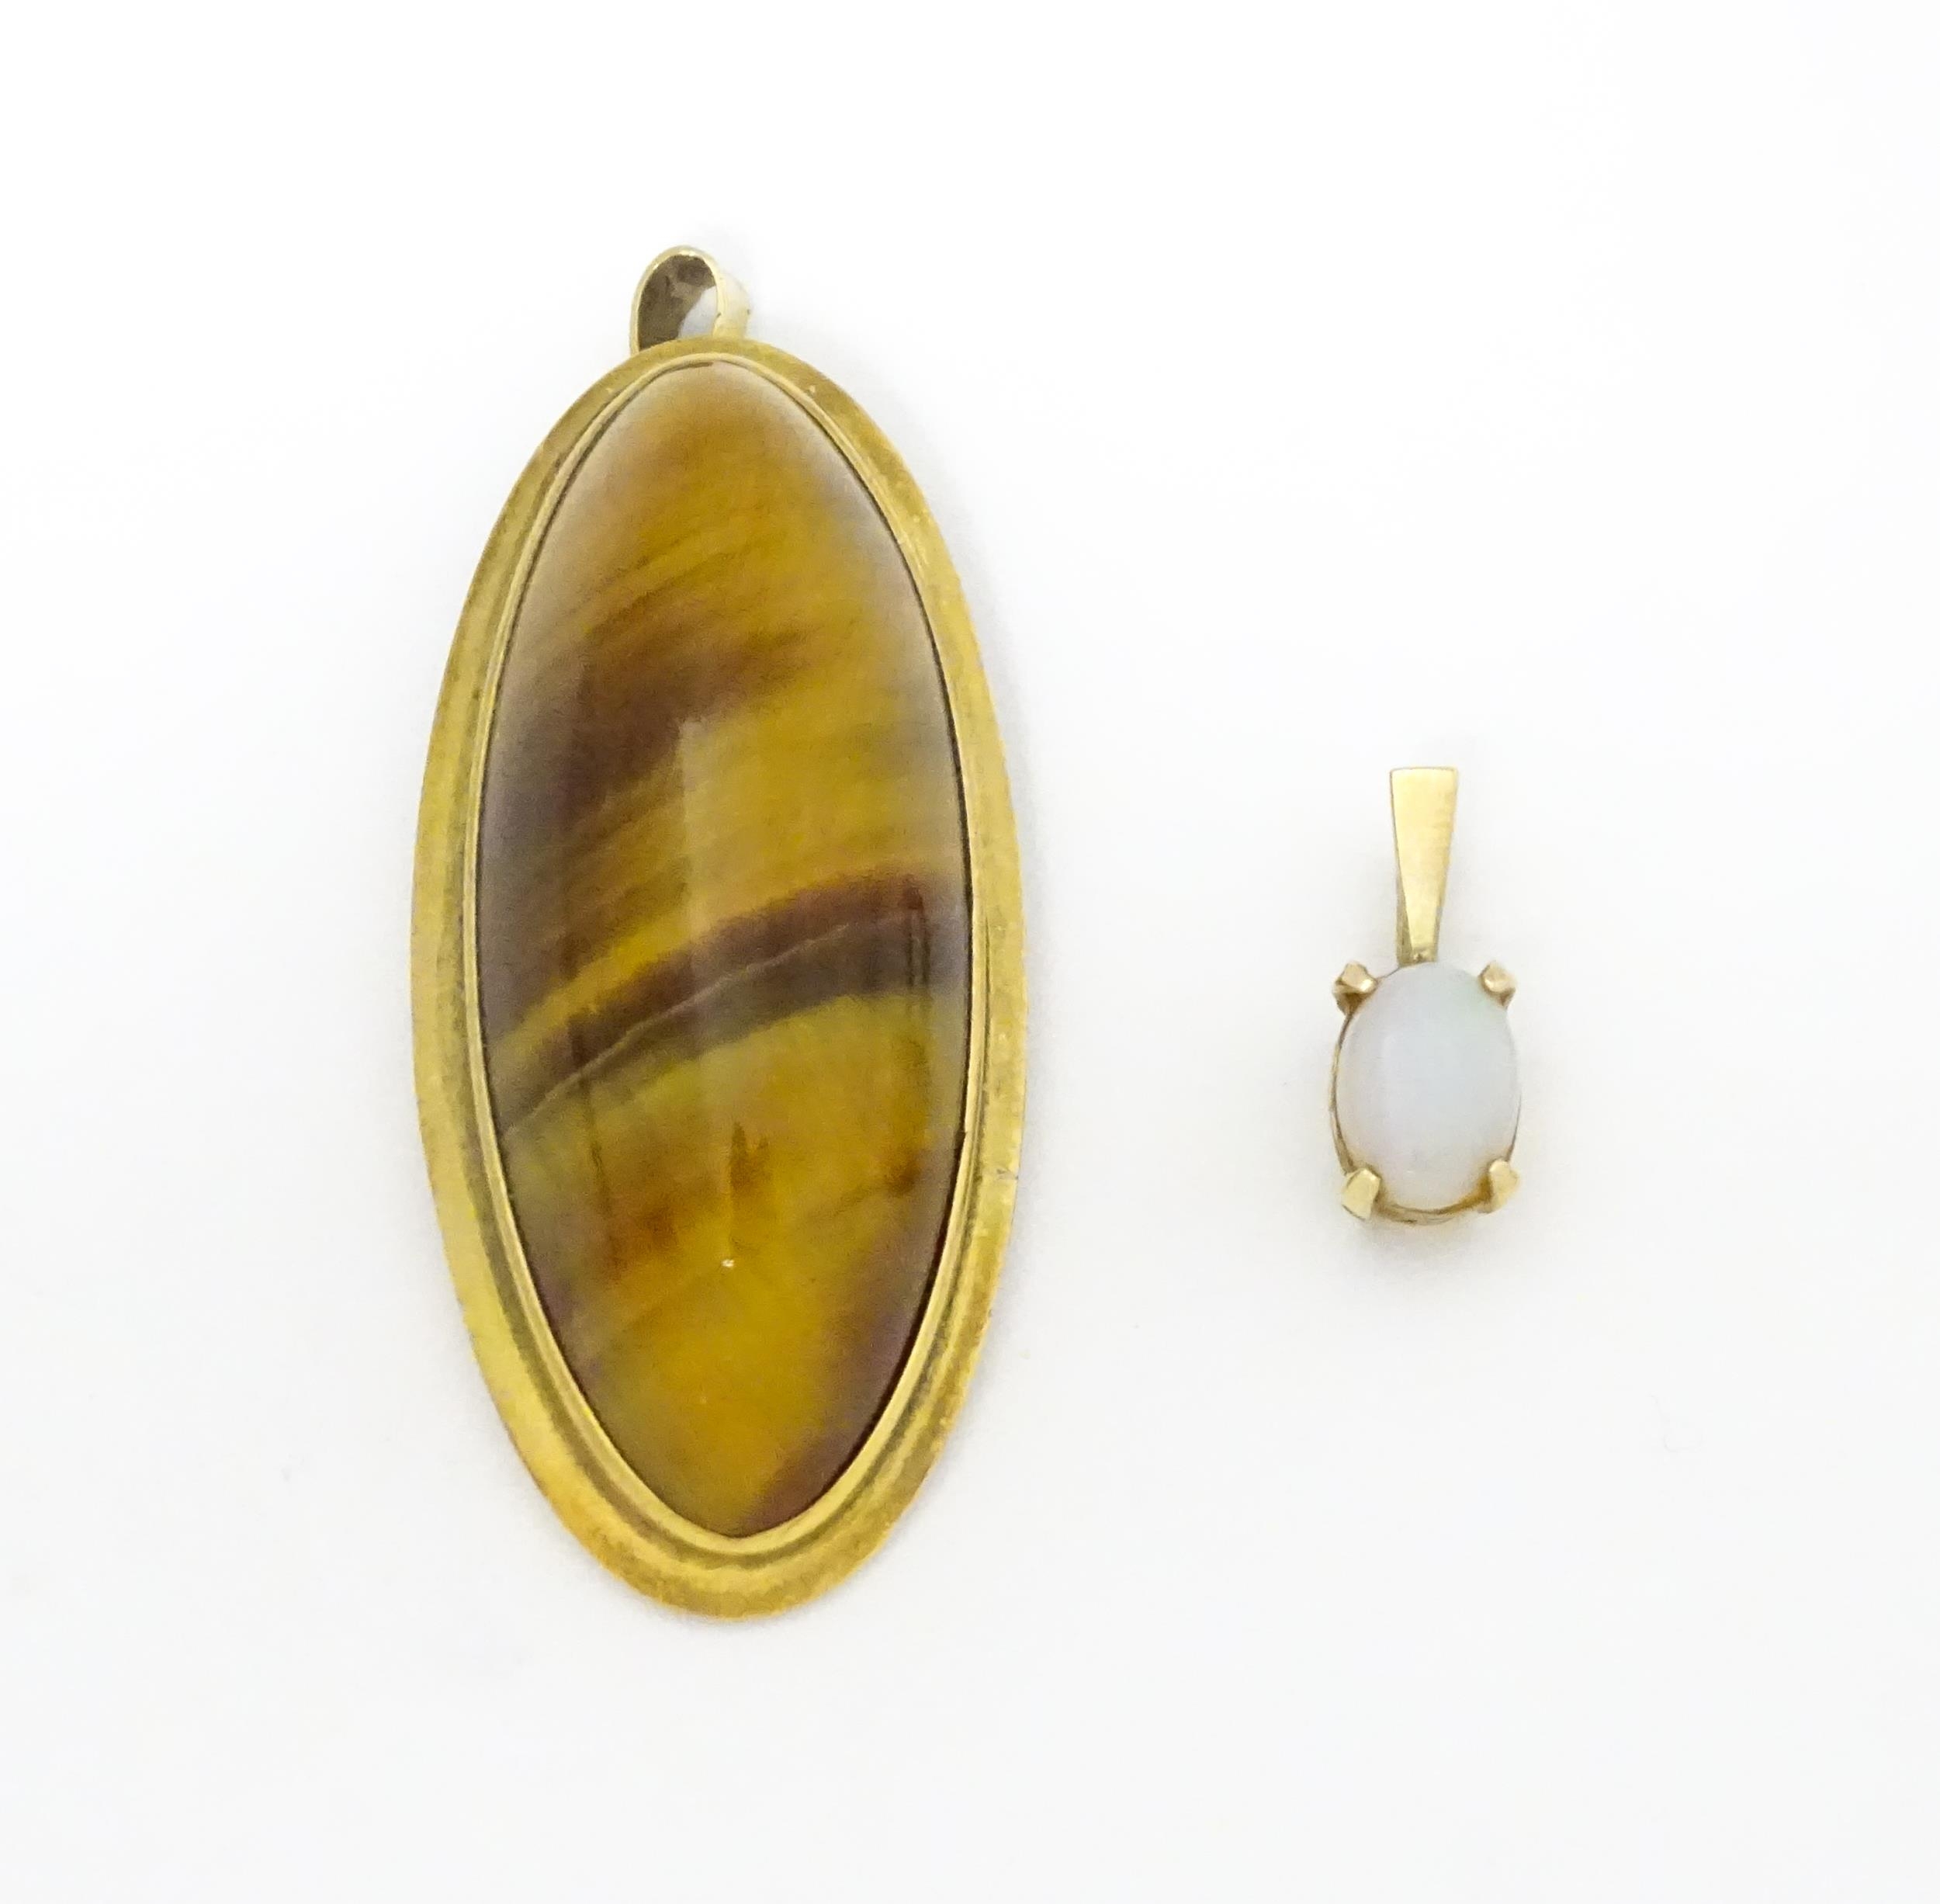 A 9ct gold pendant set with opal together with a pendant set with tigers eye cabochon. Approx 1 1/2"